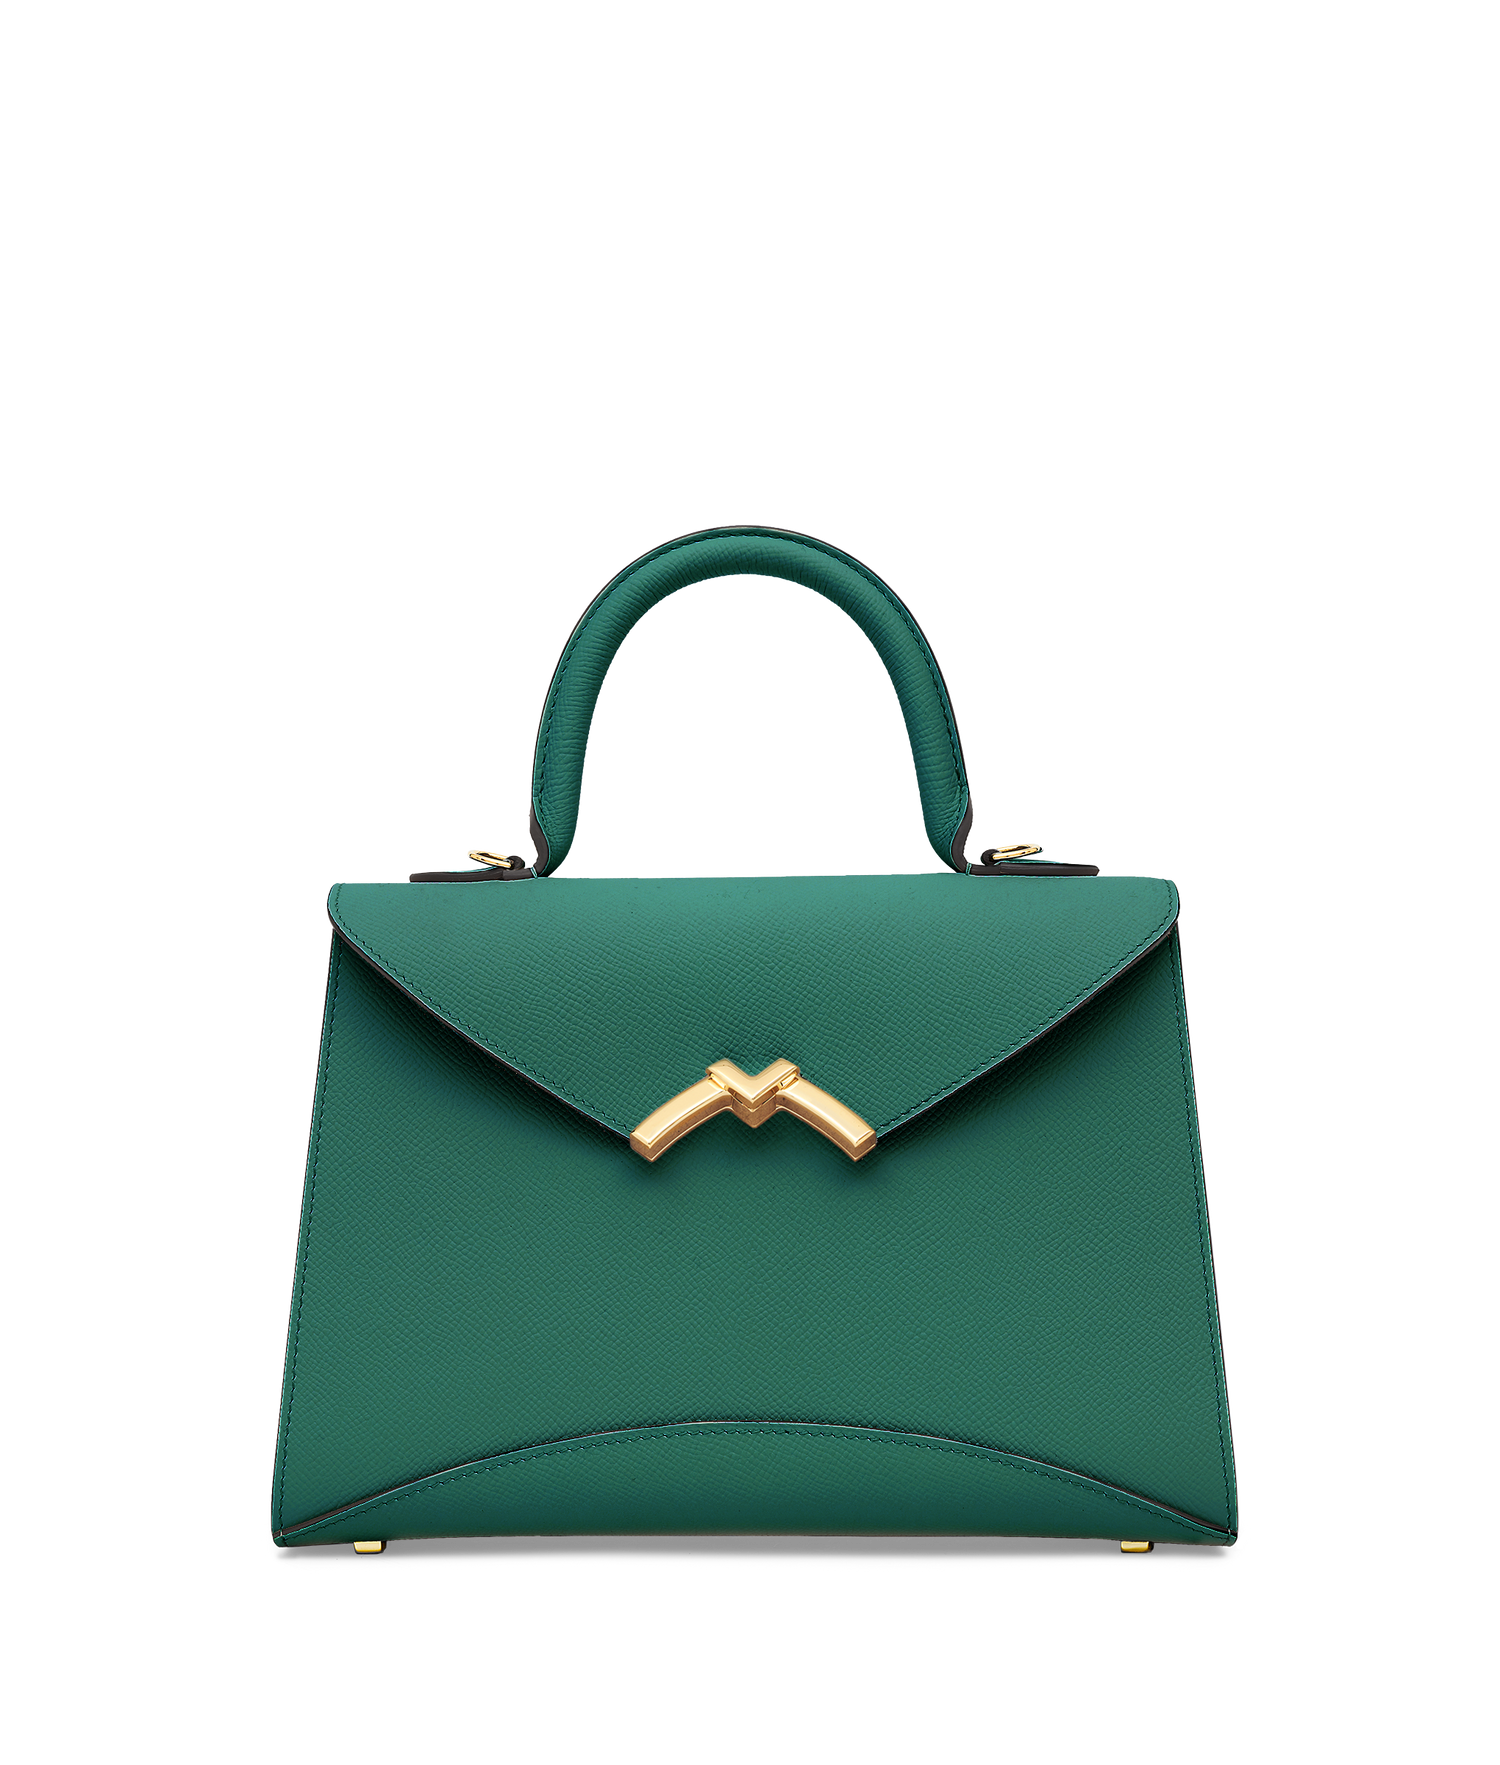 YOUR IT BAG GUIDE: THE GABRIELLE BAG